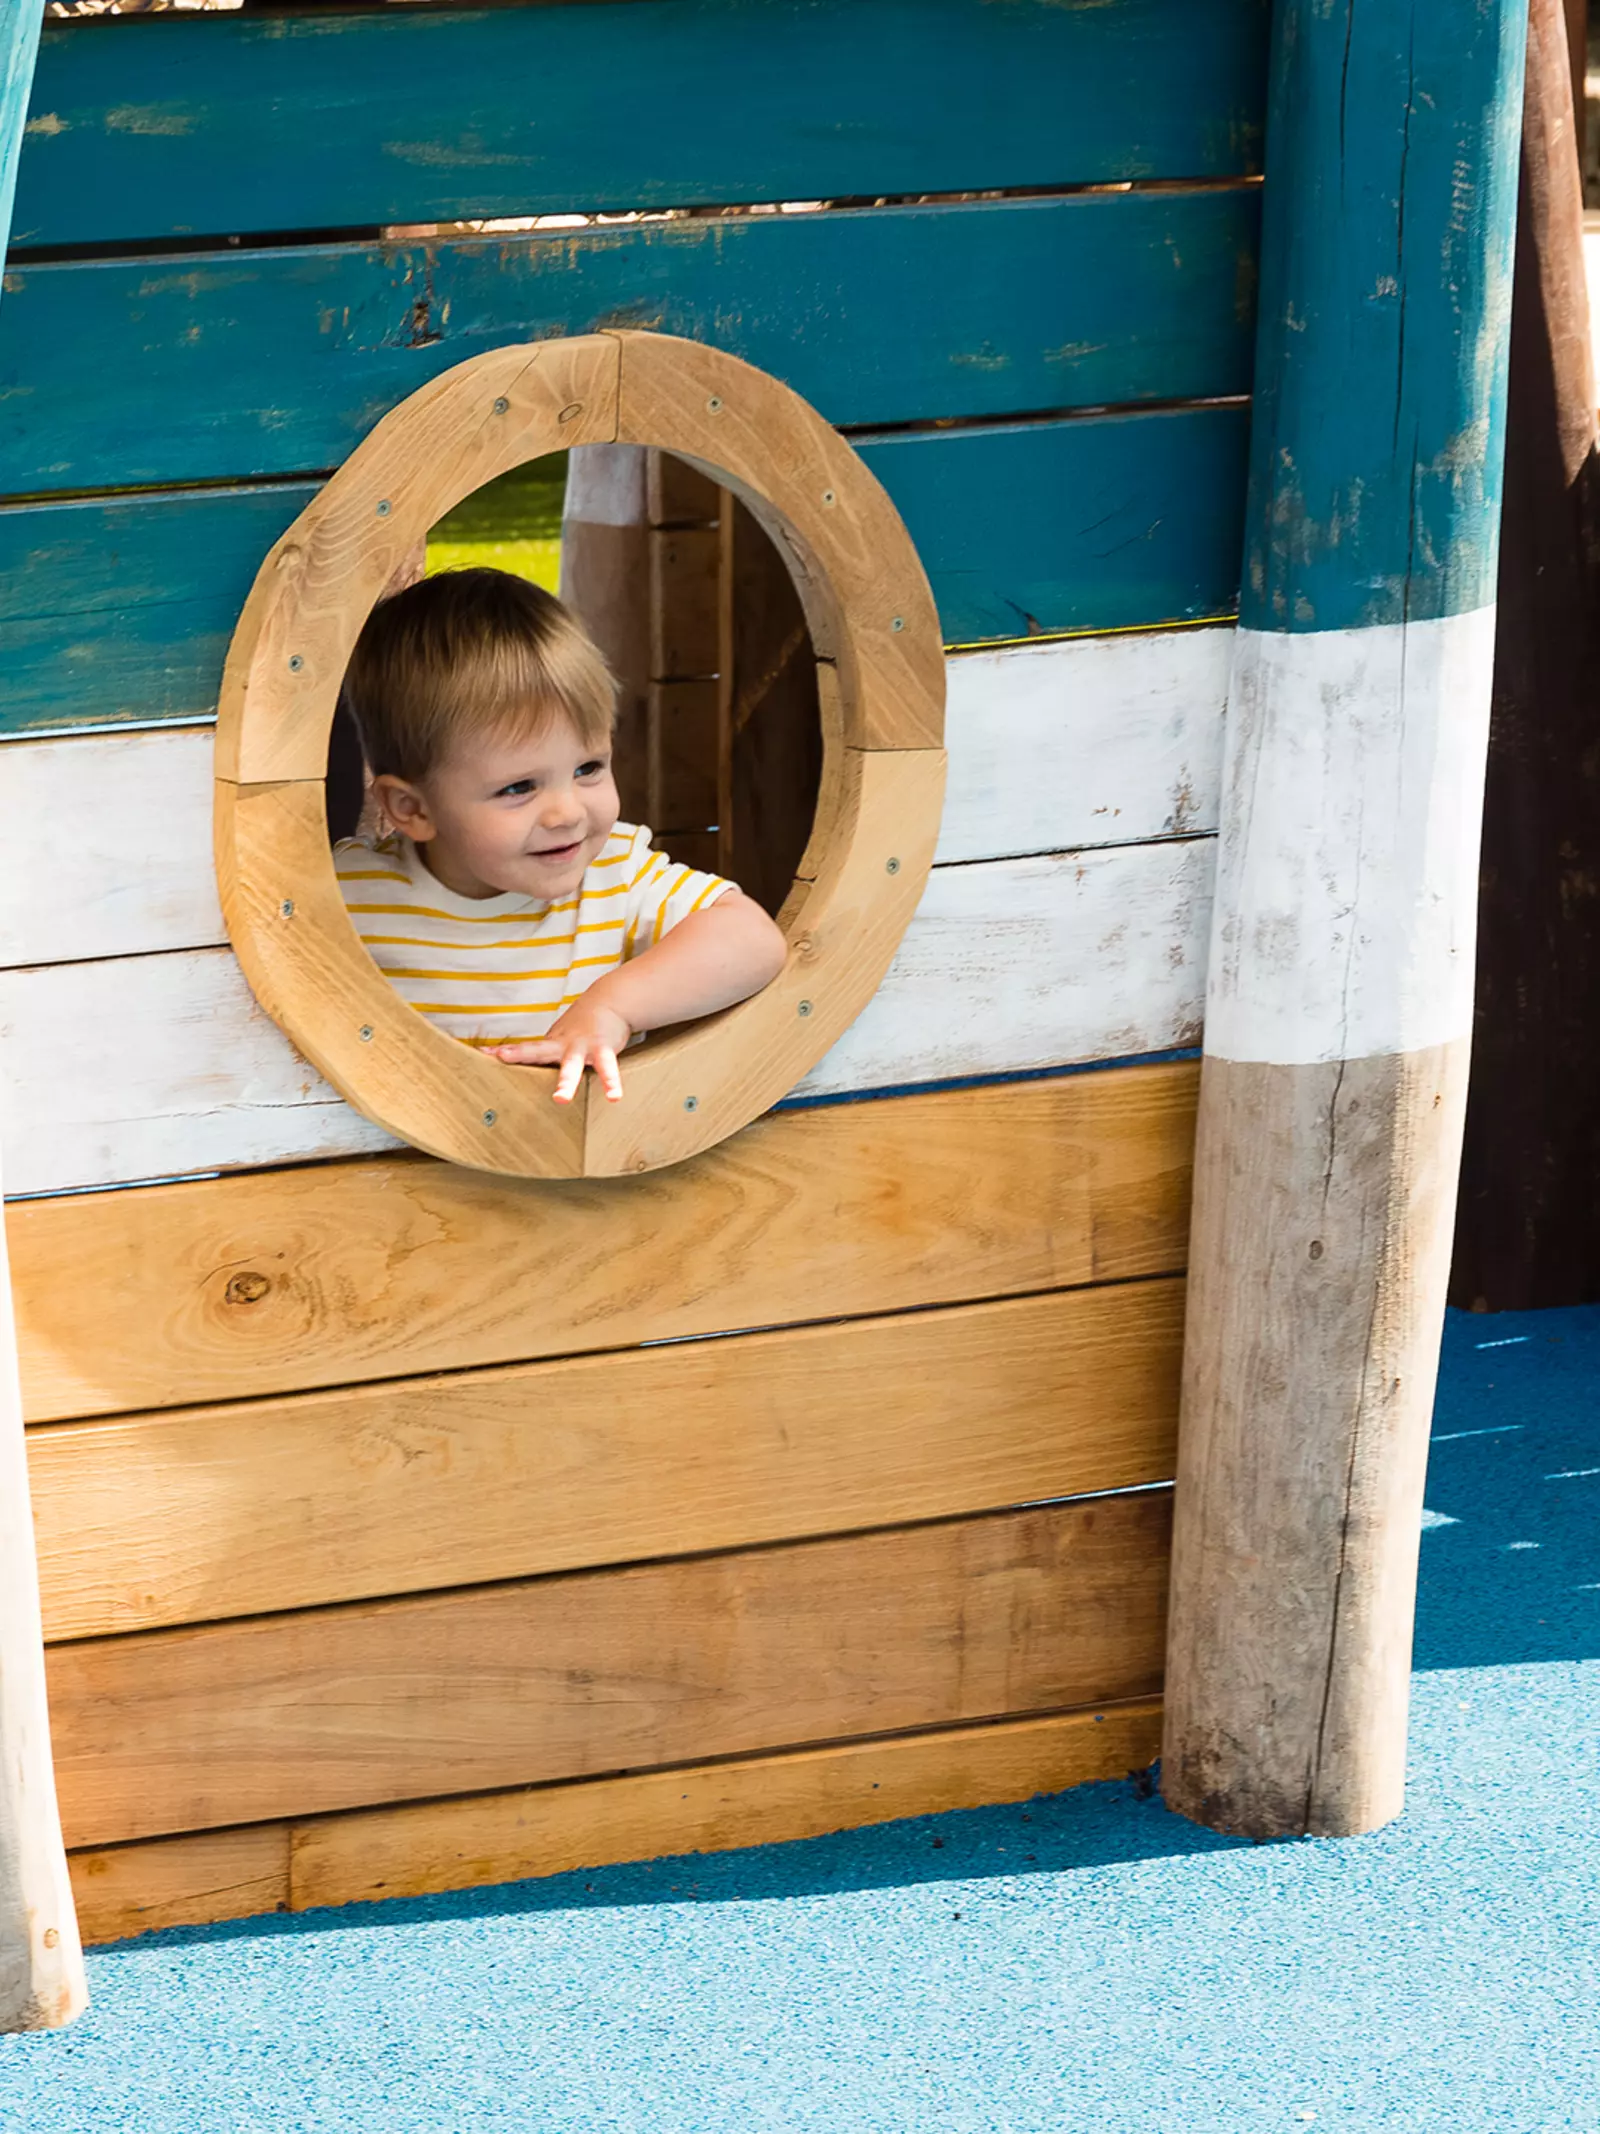 A child peers out of HMS Beagle in London Zoo's Animal Adventure